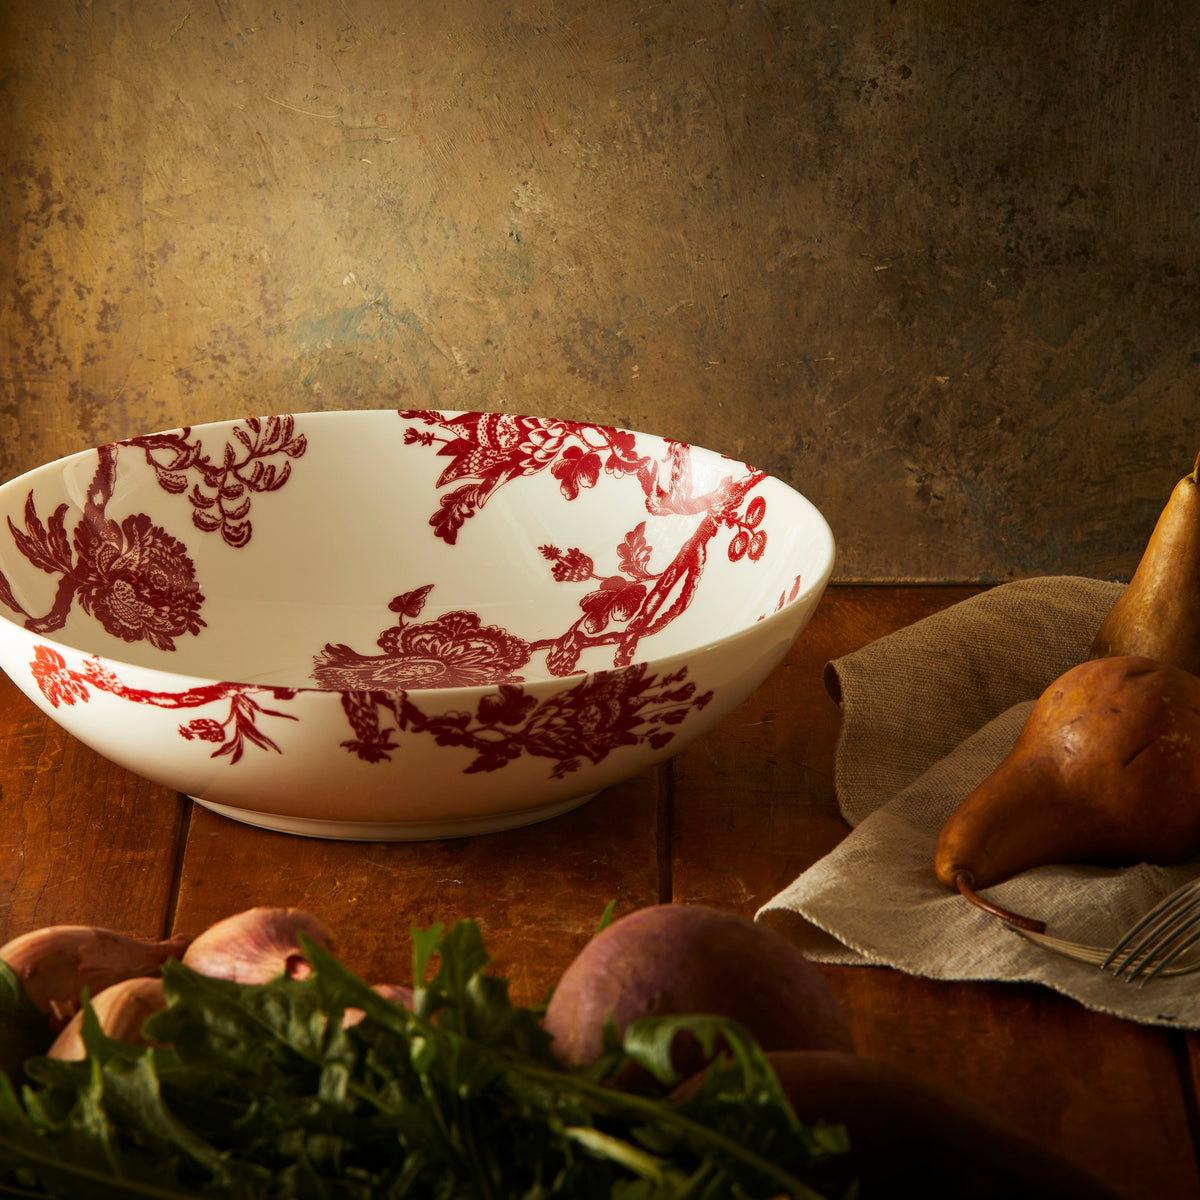 Arcadia Crimson Wide Serving Bowl by Caskata, shown here on a rustic table with pears.